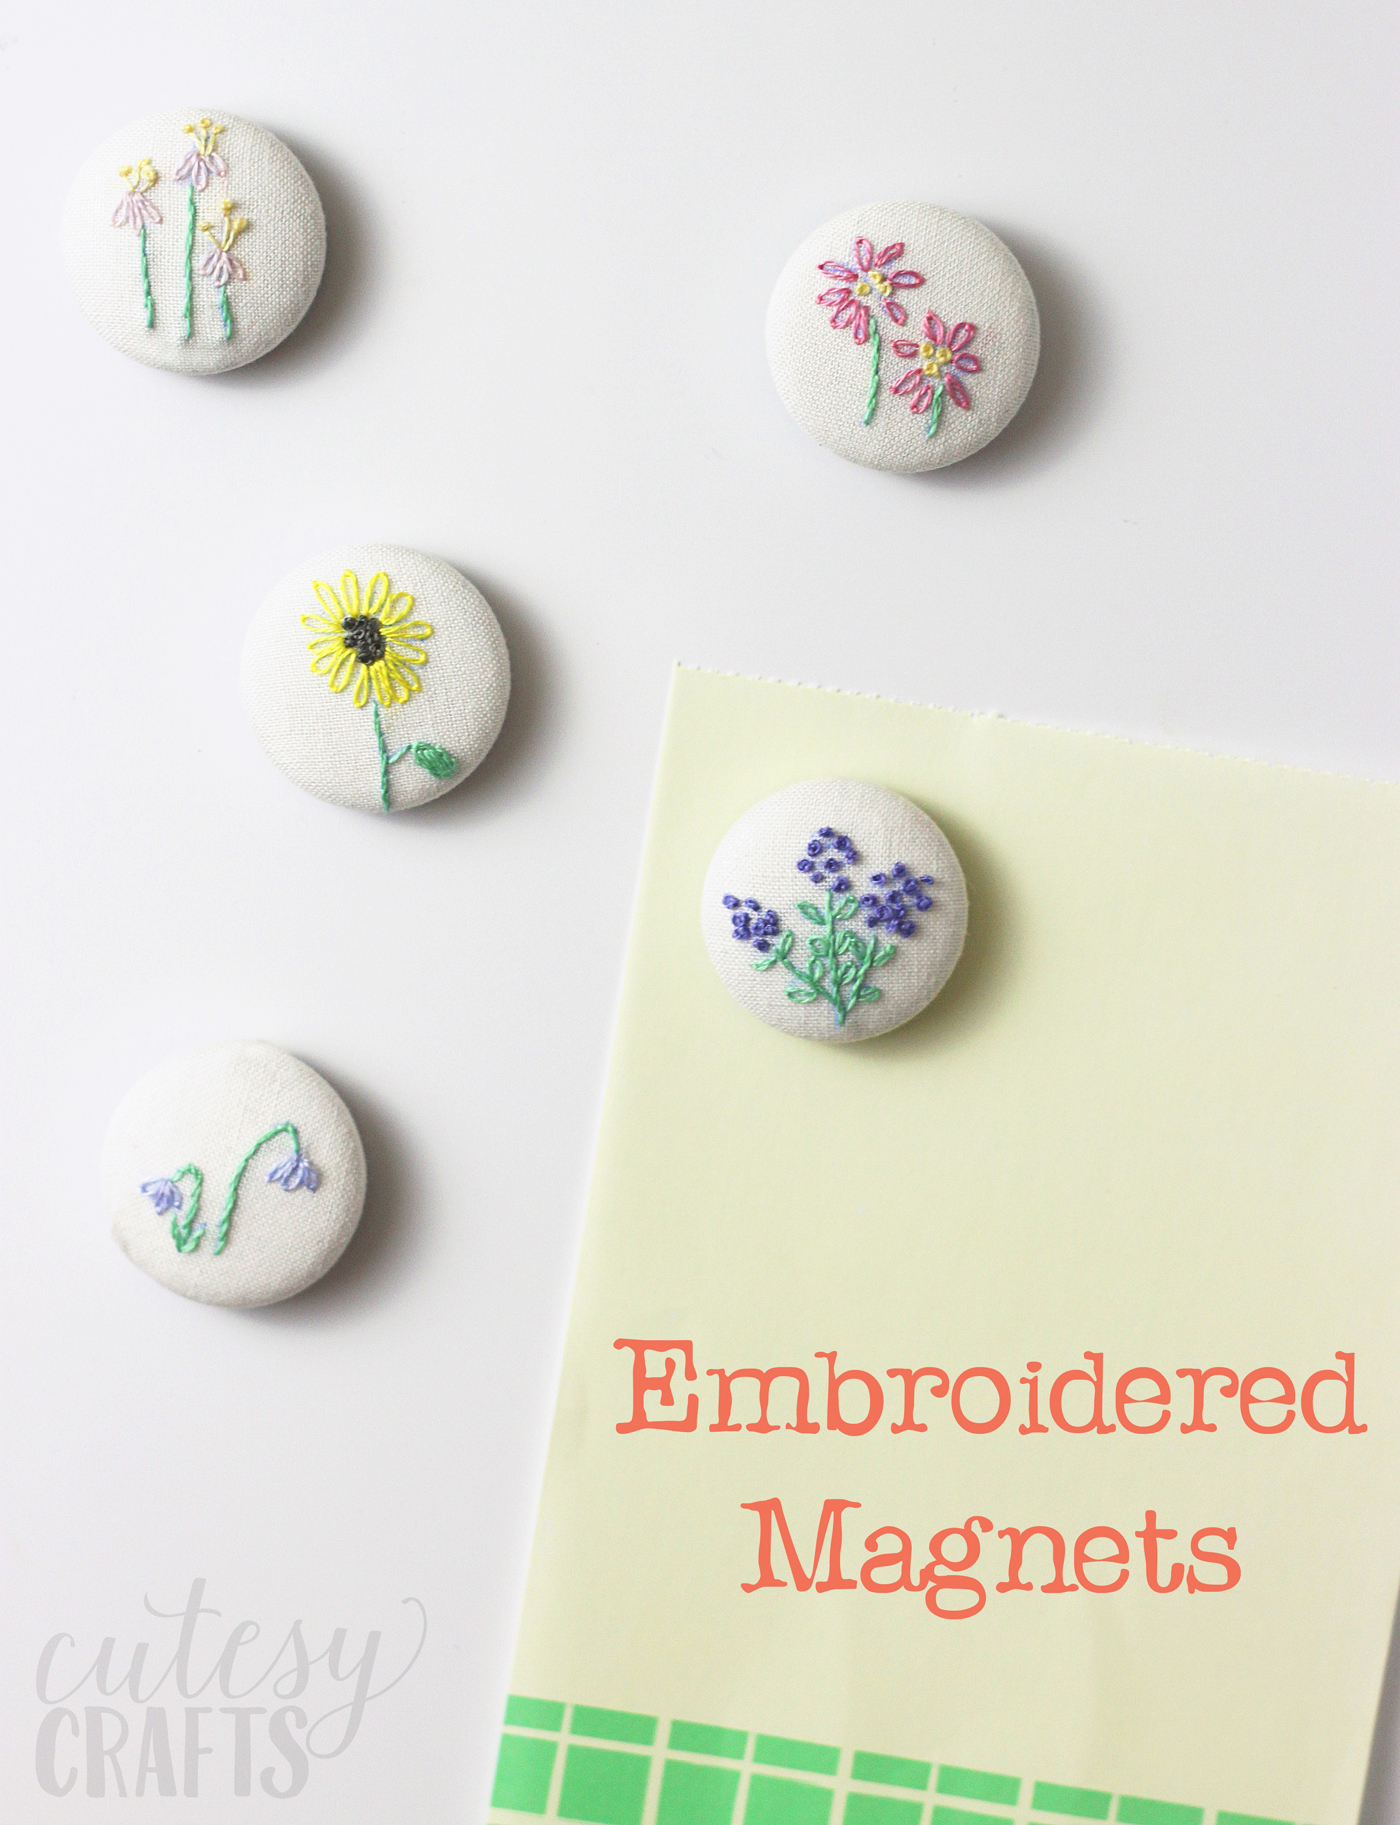 If you love the look of hand embroidery, these DIY magnets are perfect for you. The delicate floral pattern is so pretty! These make great gifts too.